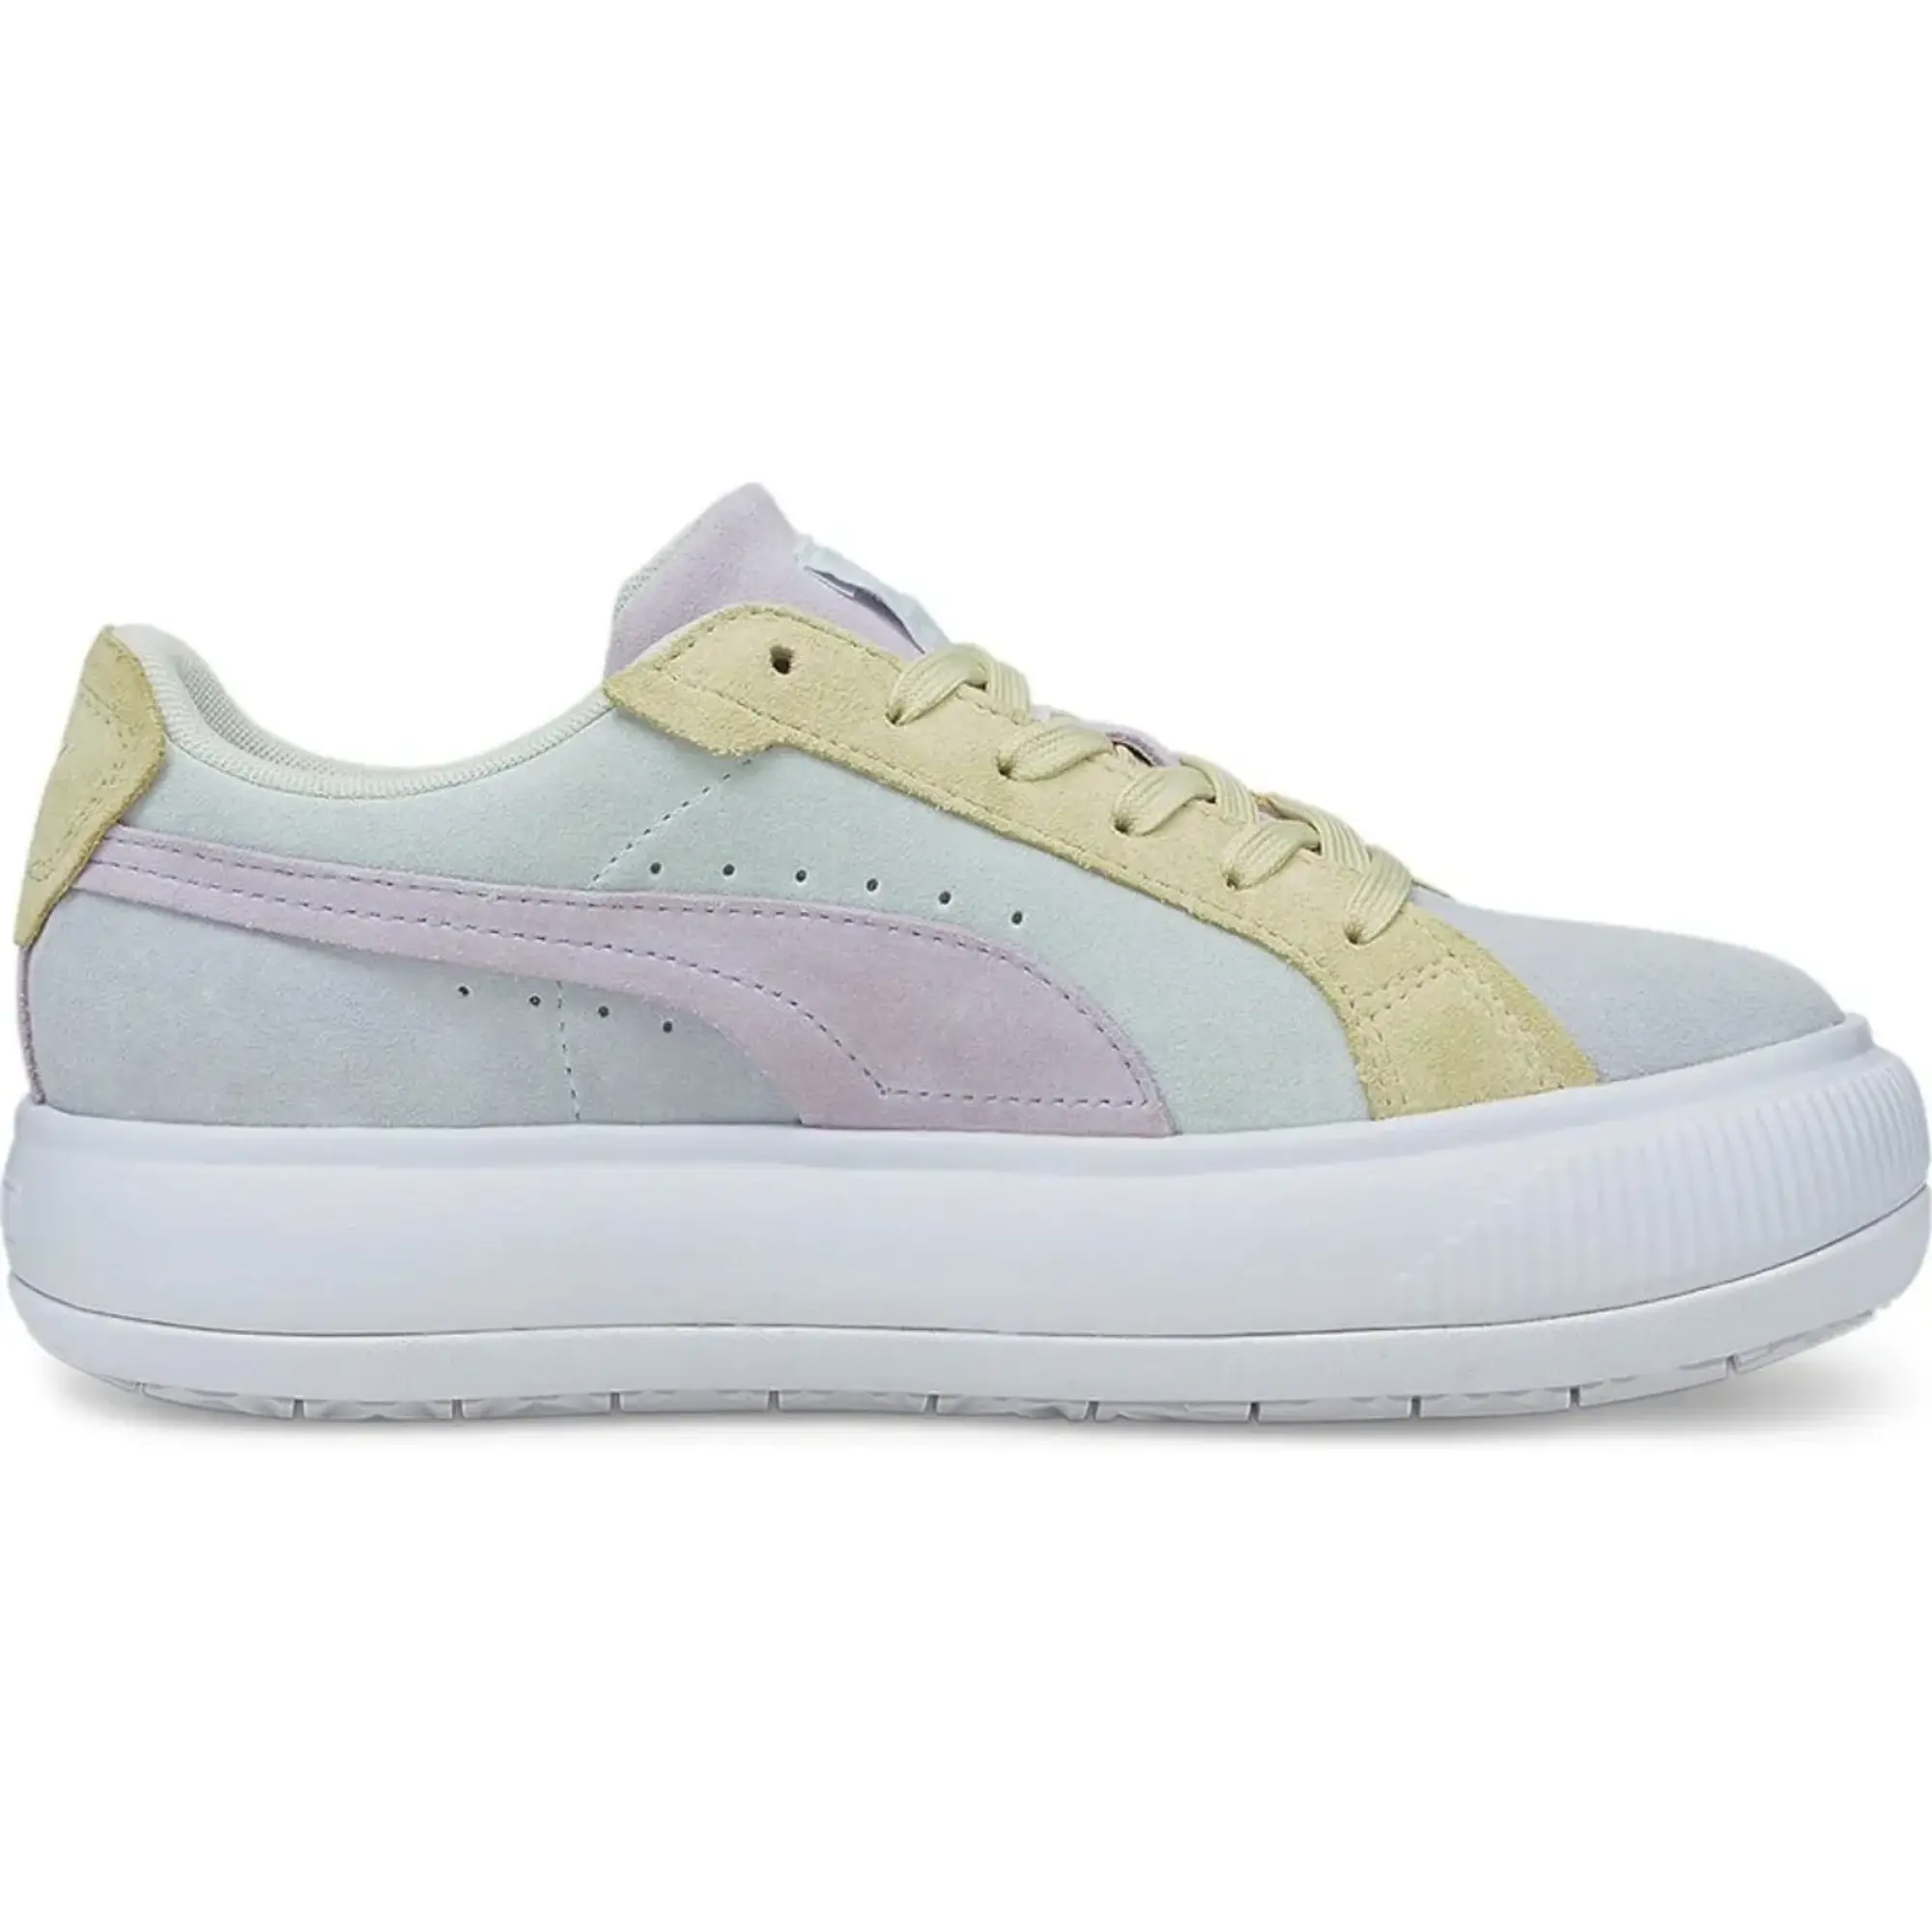 Puma Womens Suede Mayu Raw Trainers - Multicolour Leather